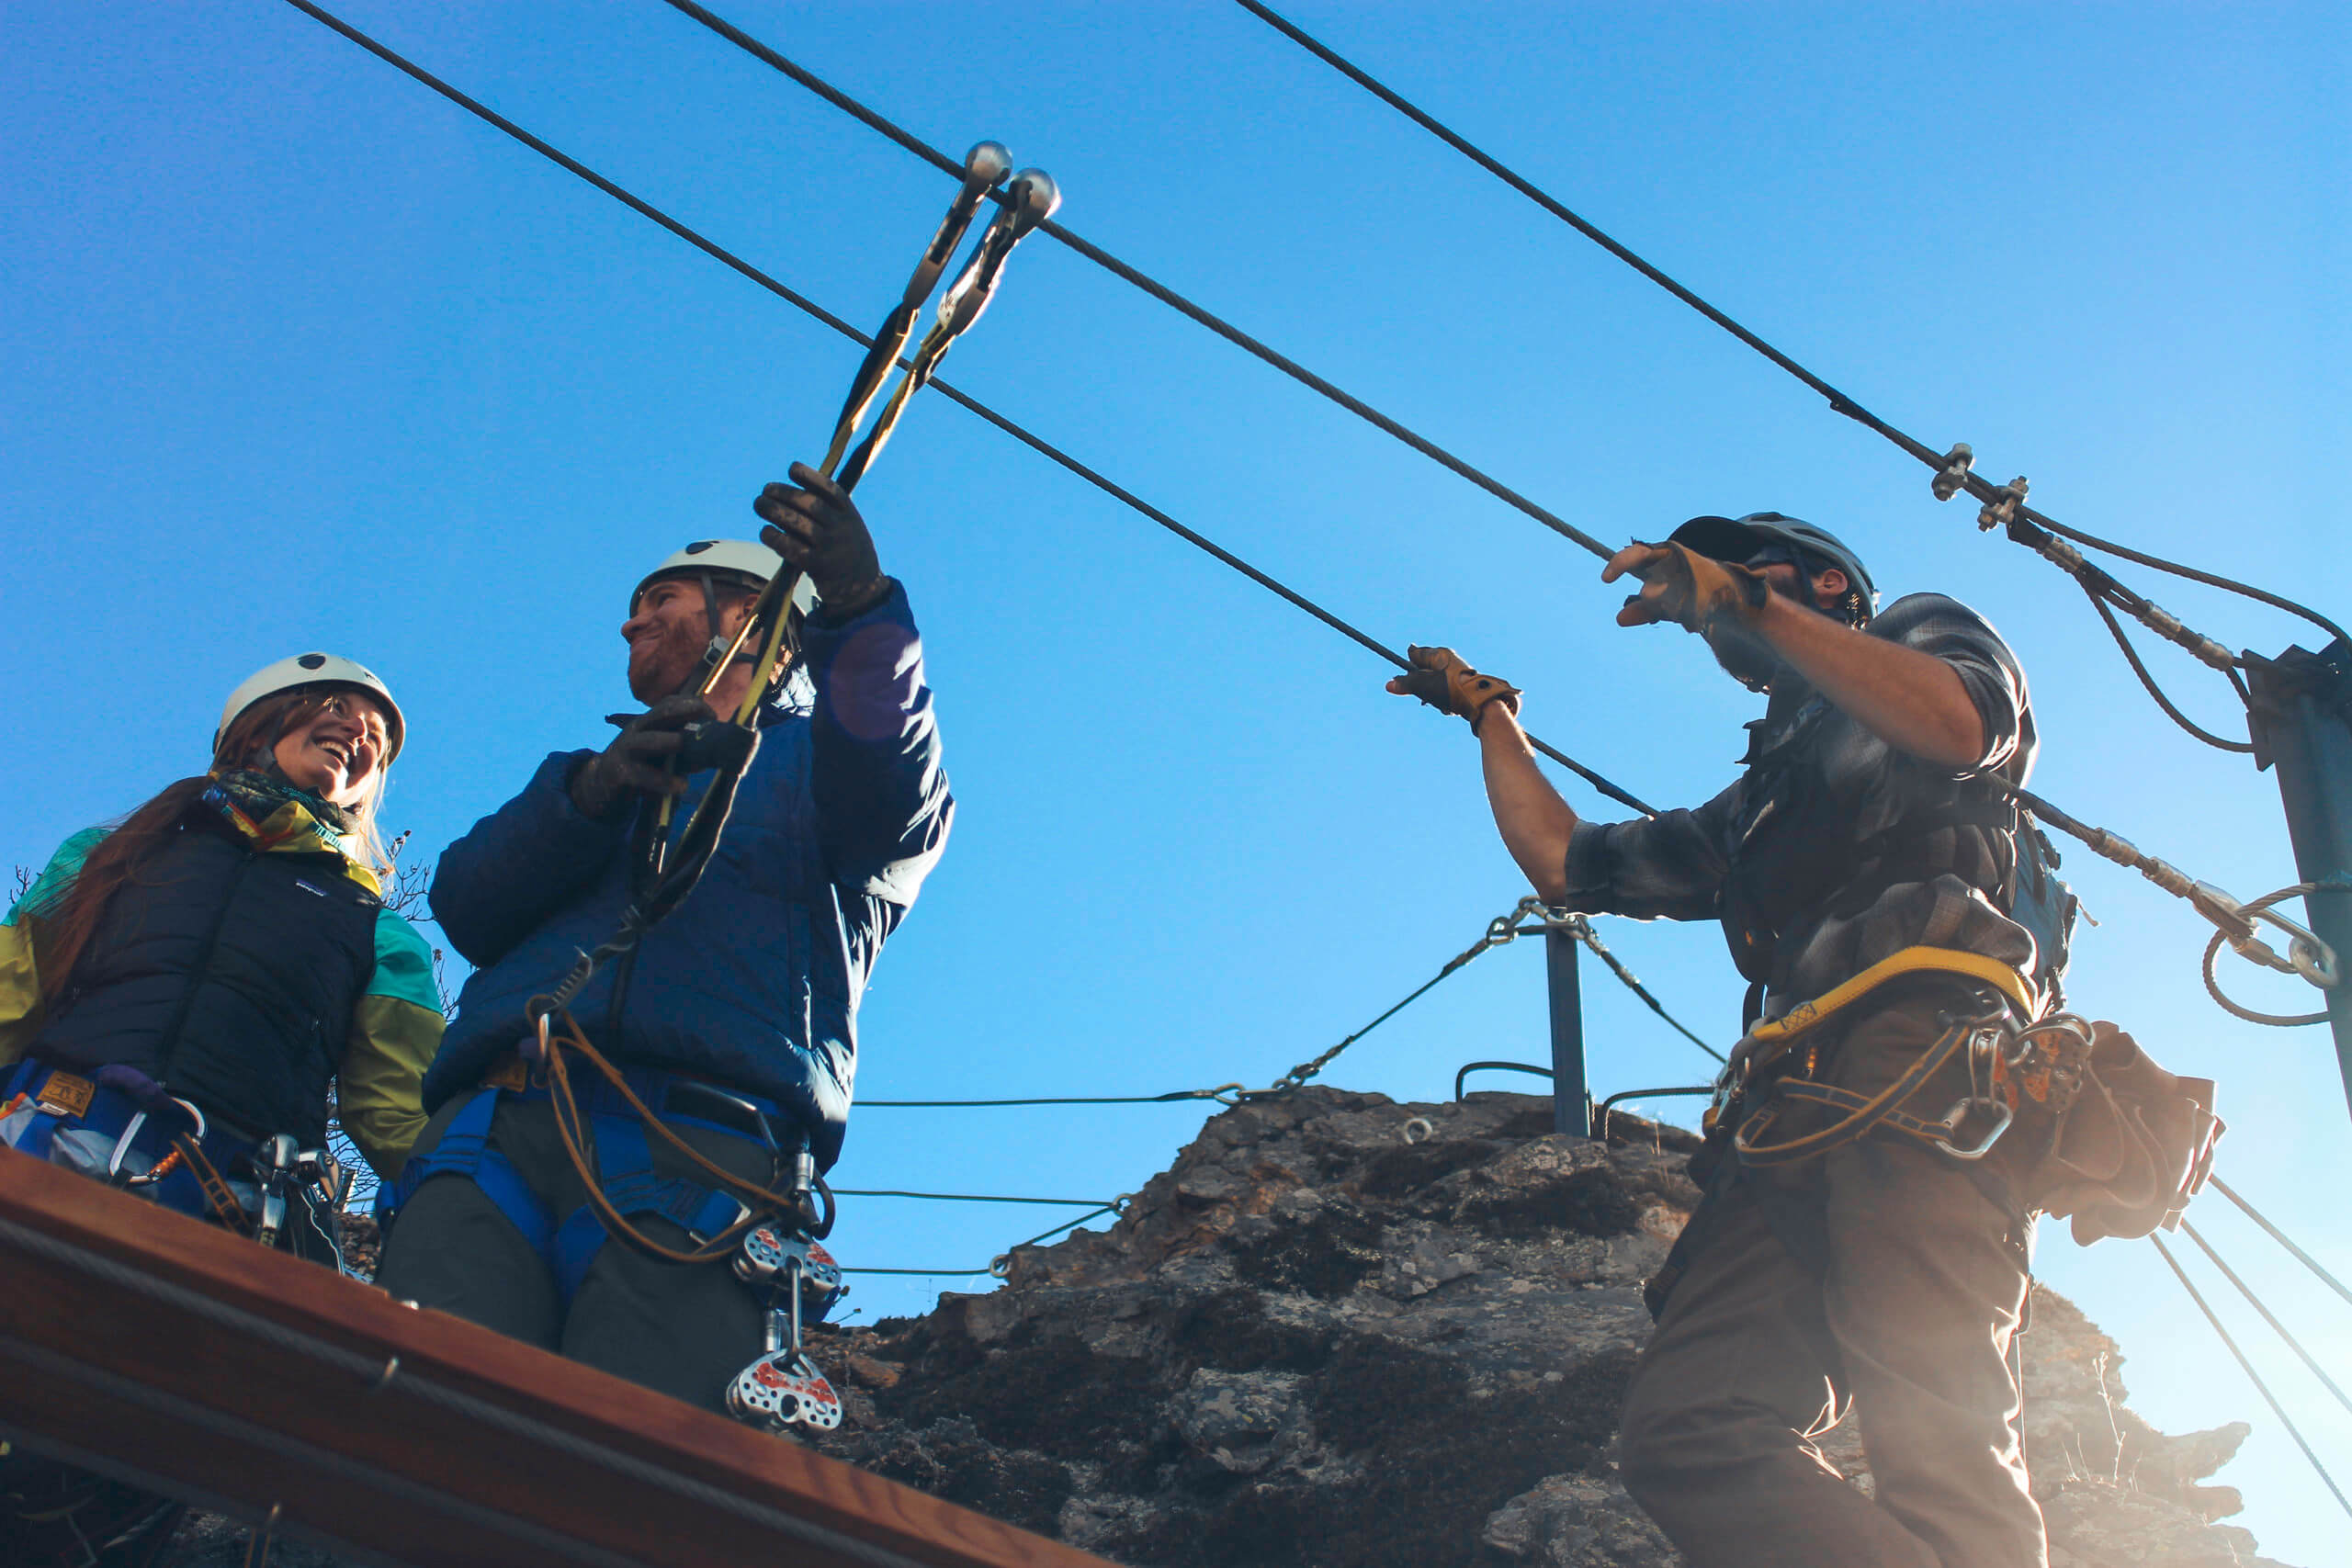 A group of people laughing on the via ferrata course